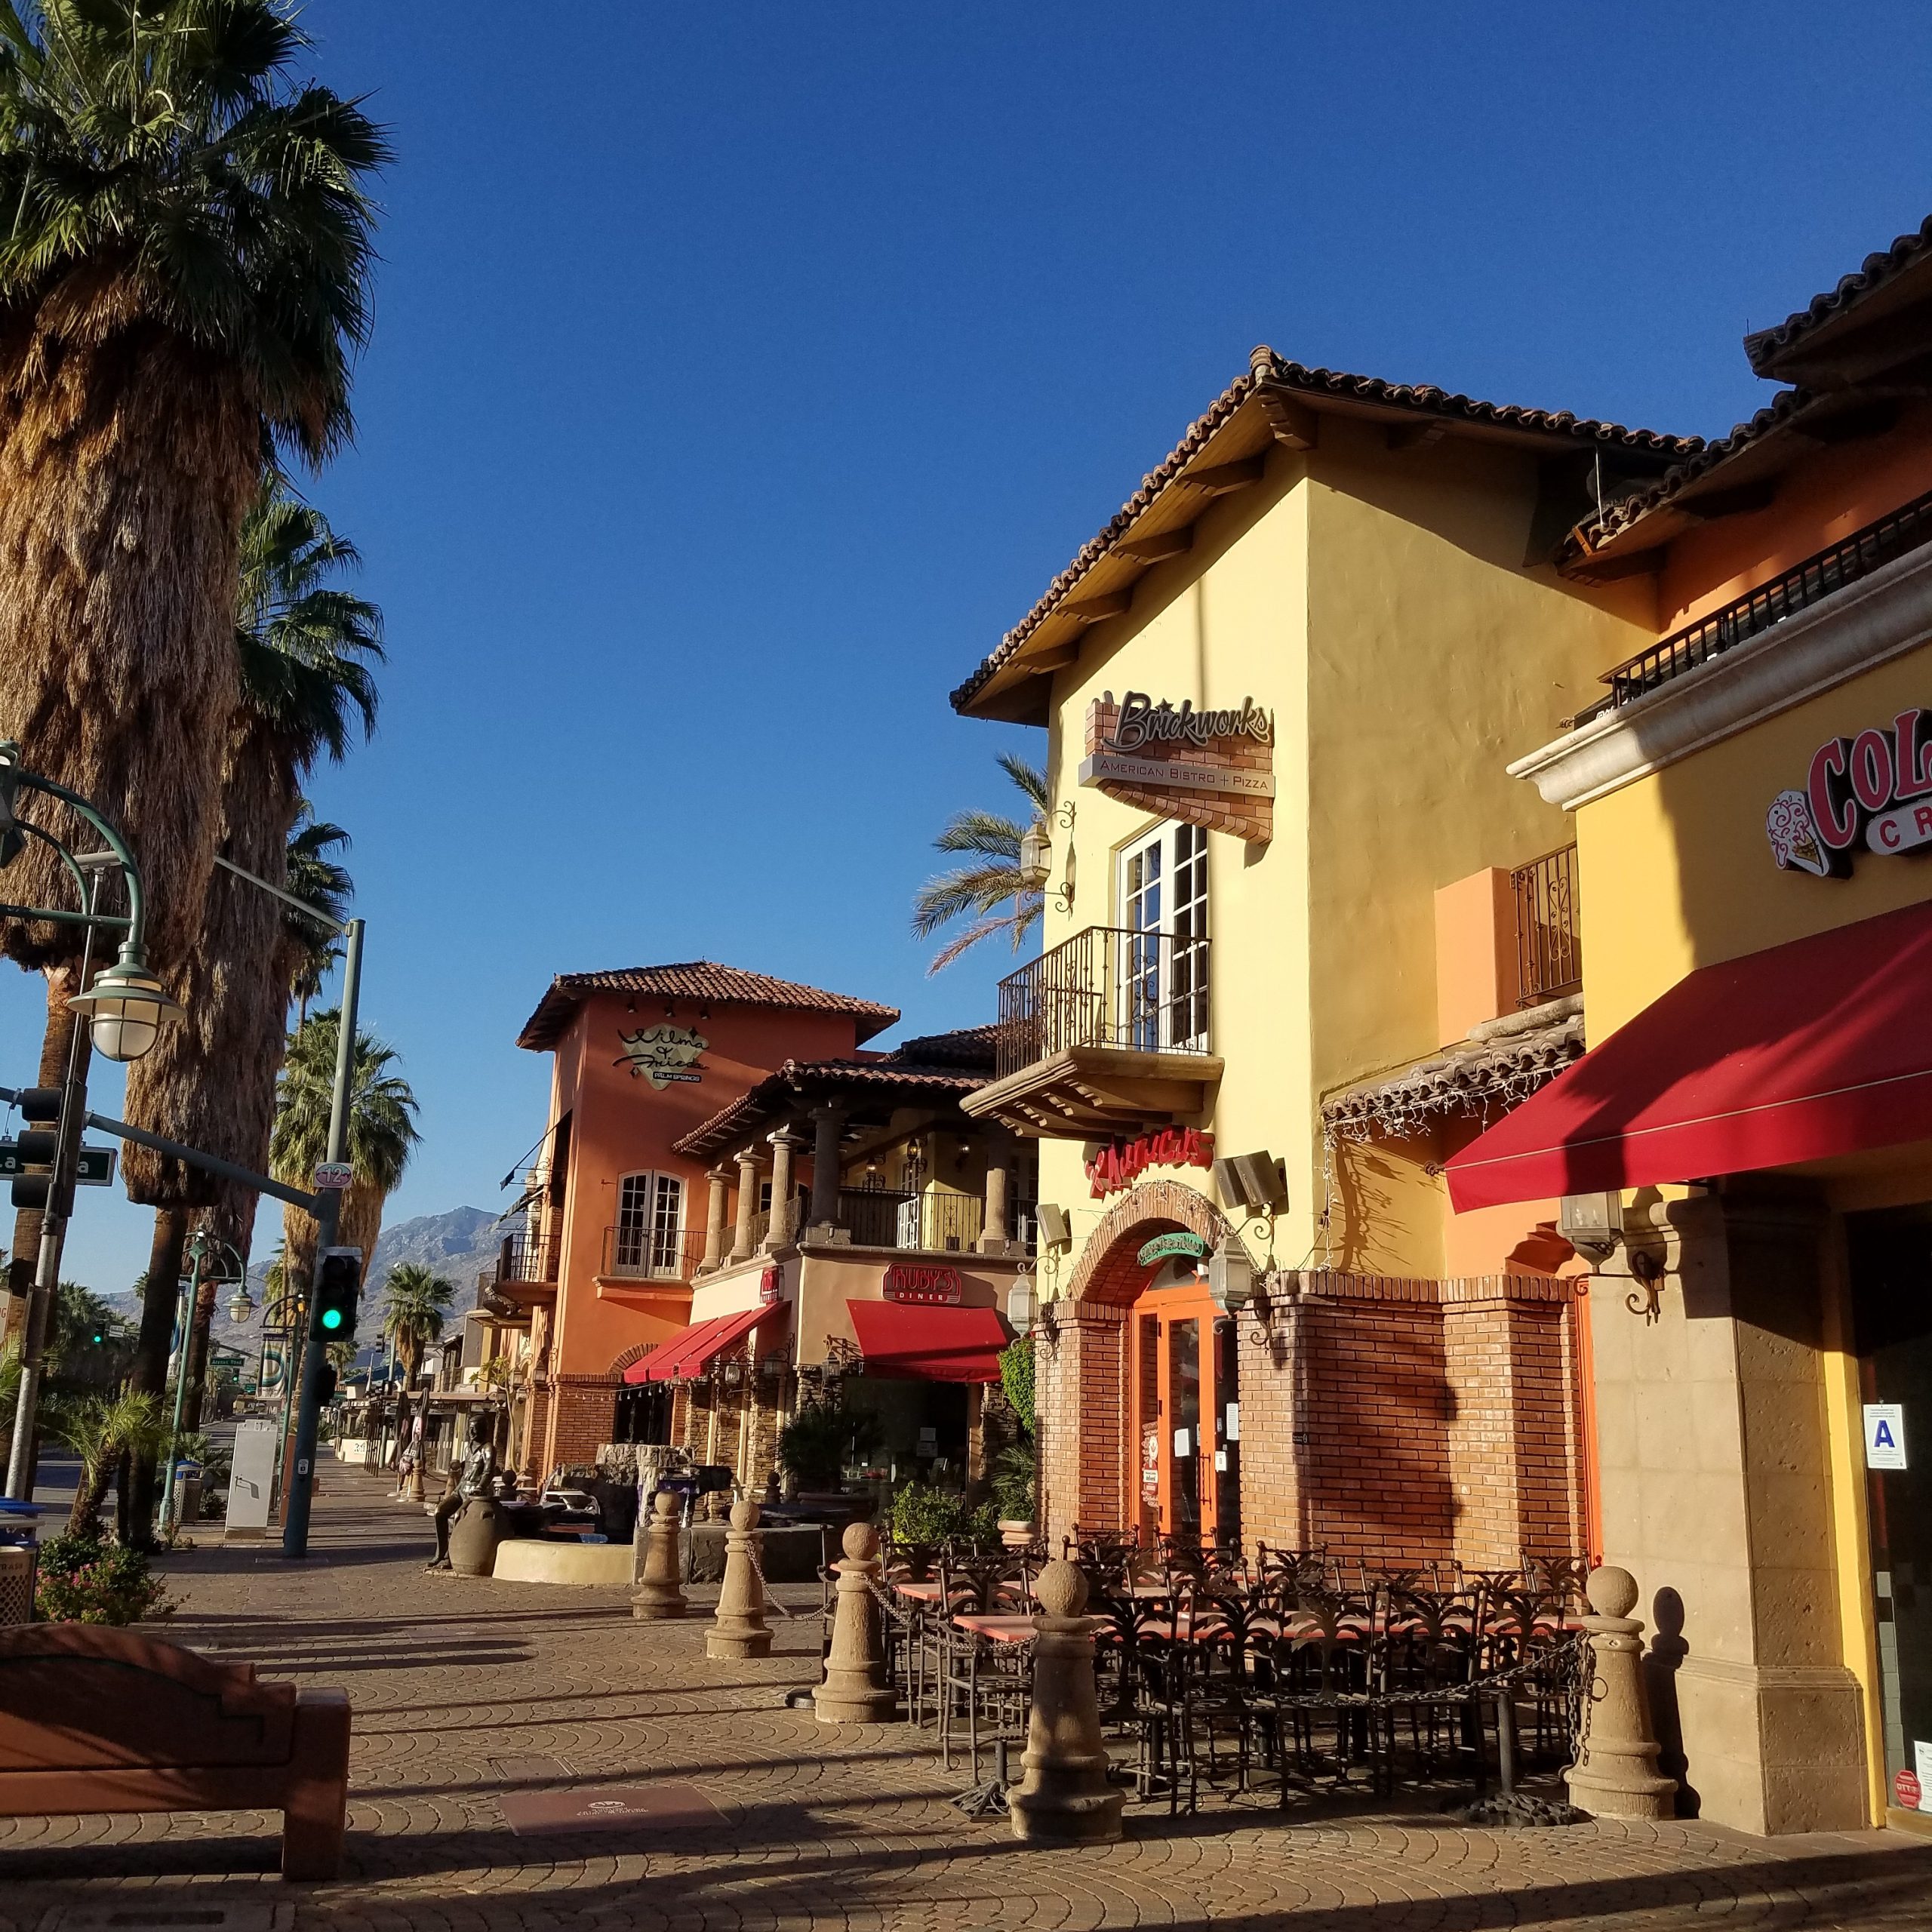 Shopping in downtown Palm Springs California